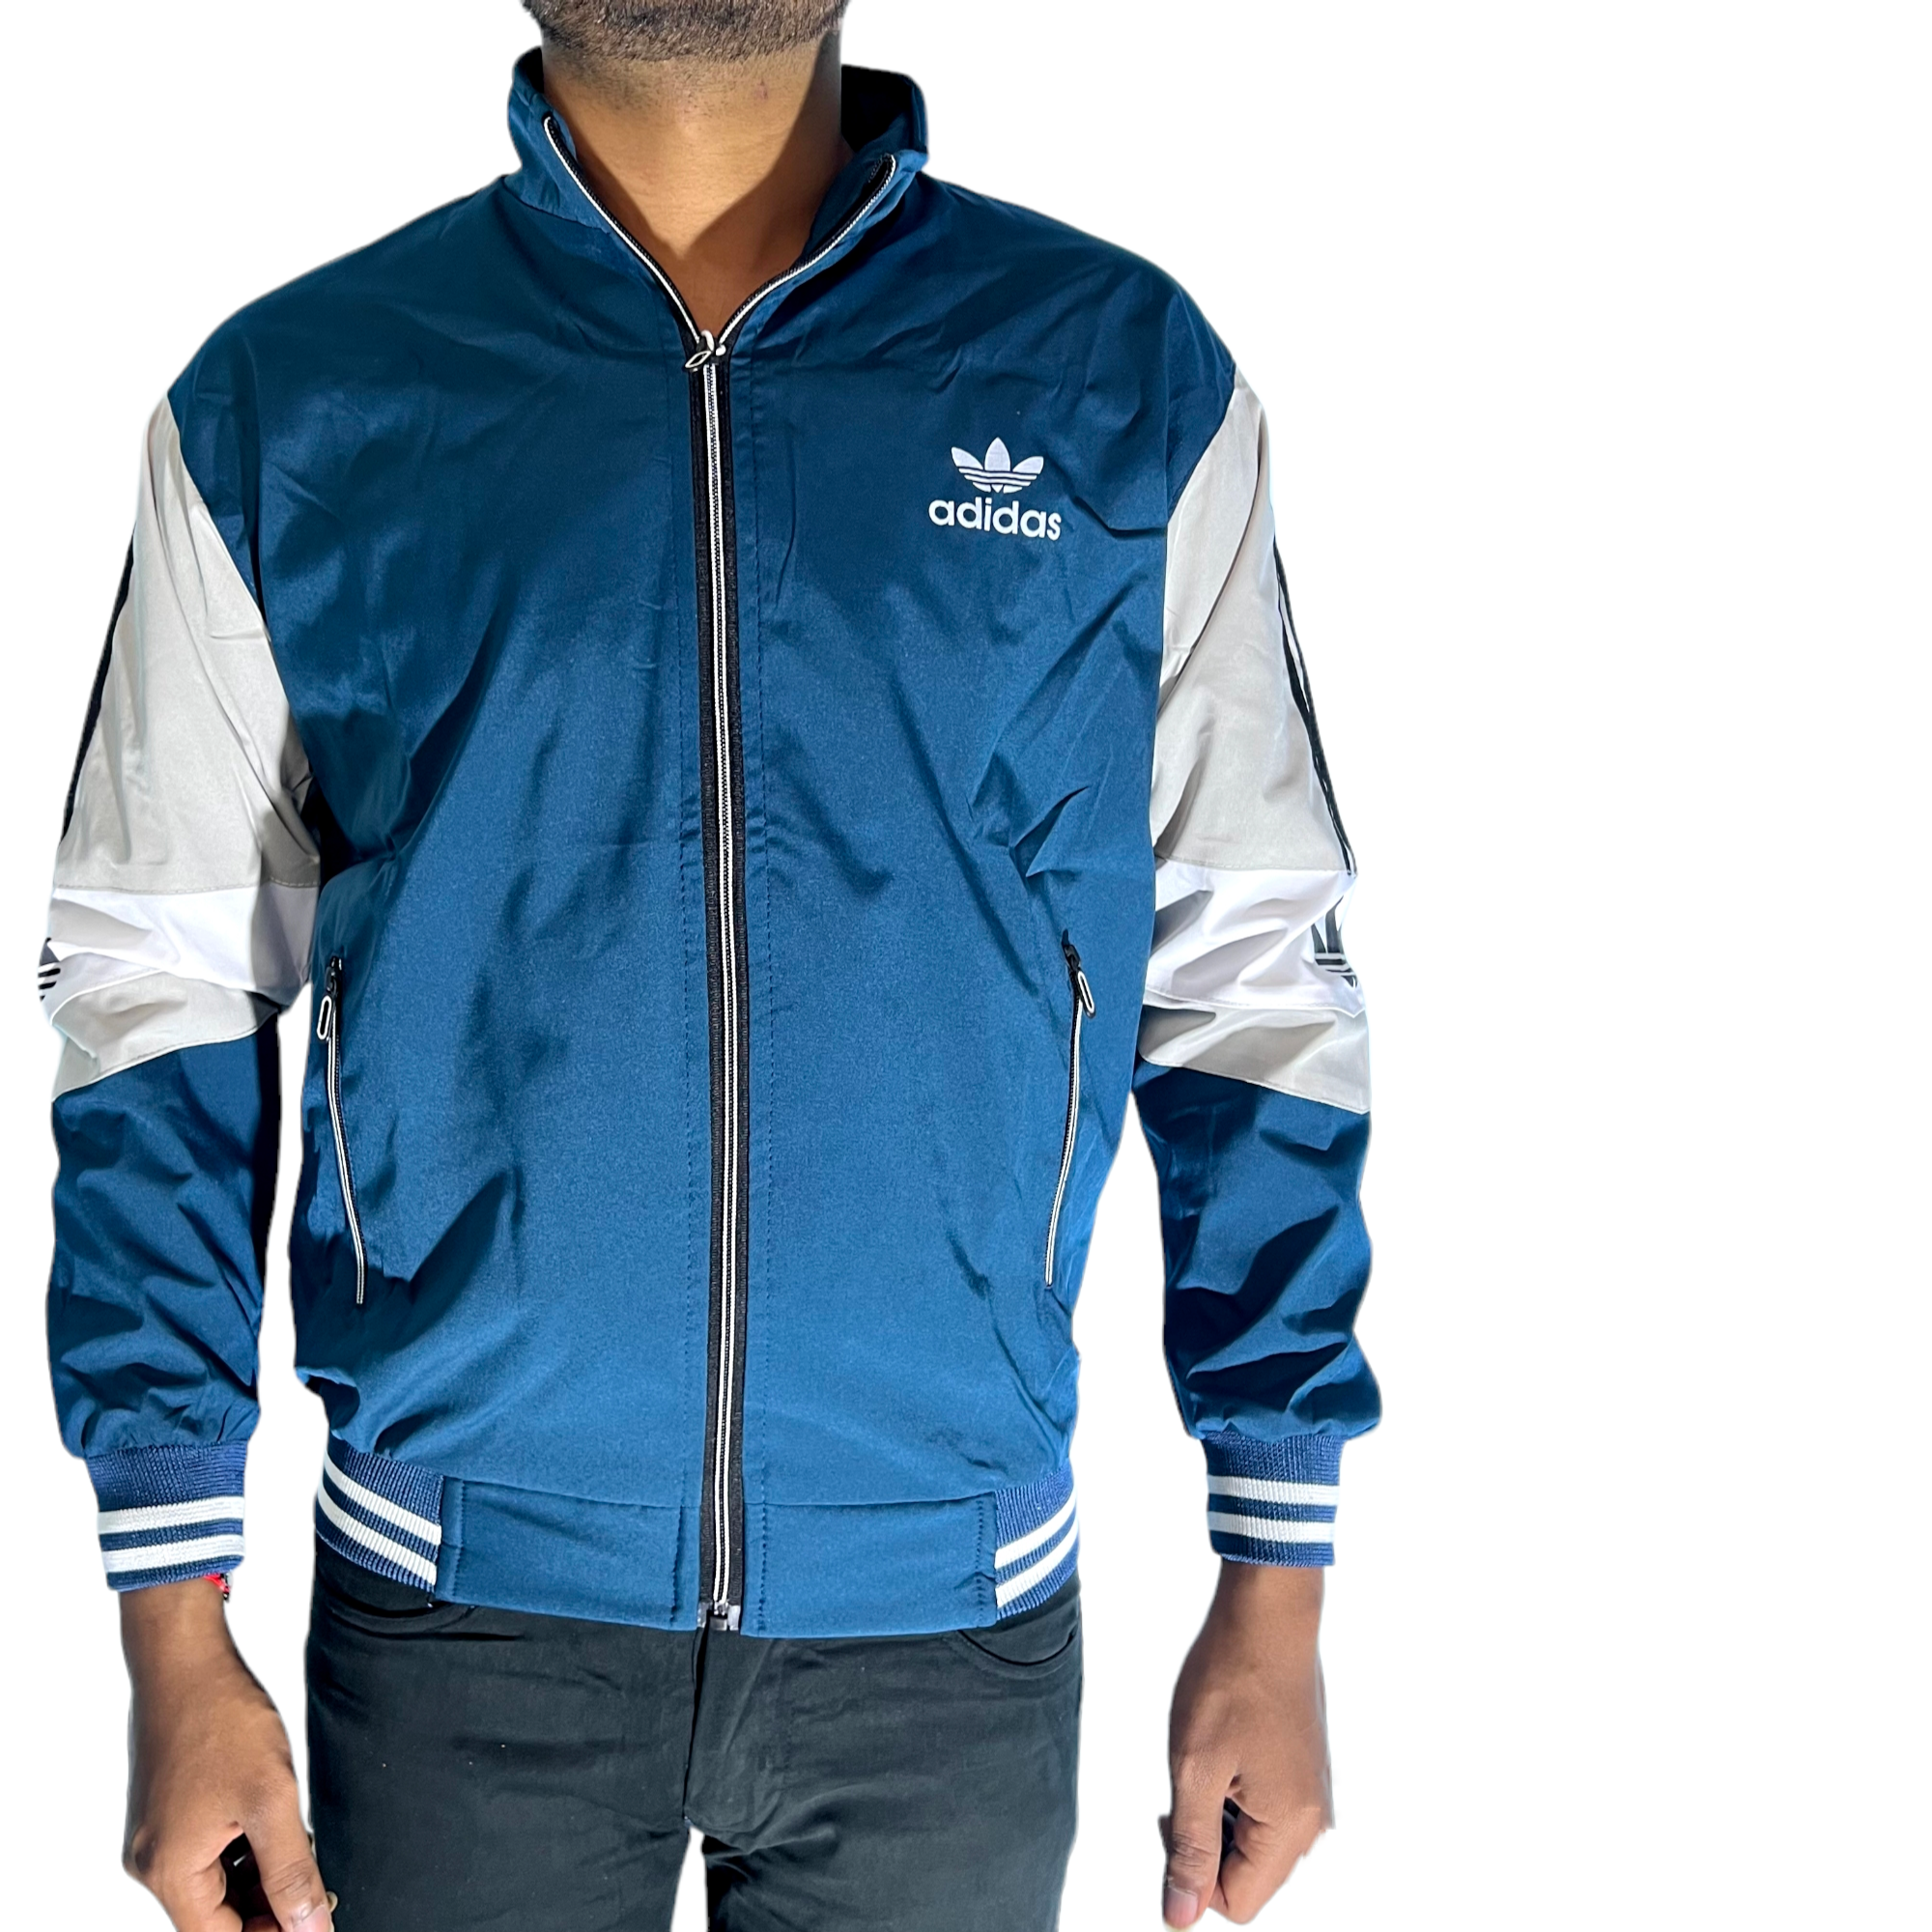 Addidas Windcheater - Blue Stylish and Weather-Resistant Outdoor Jacket